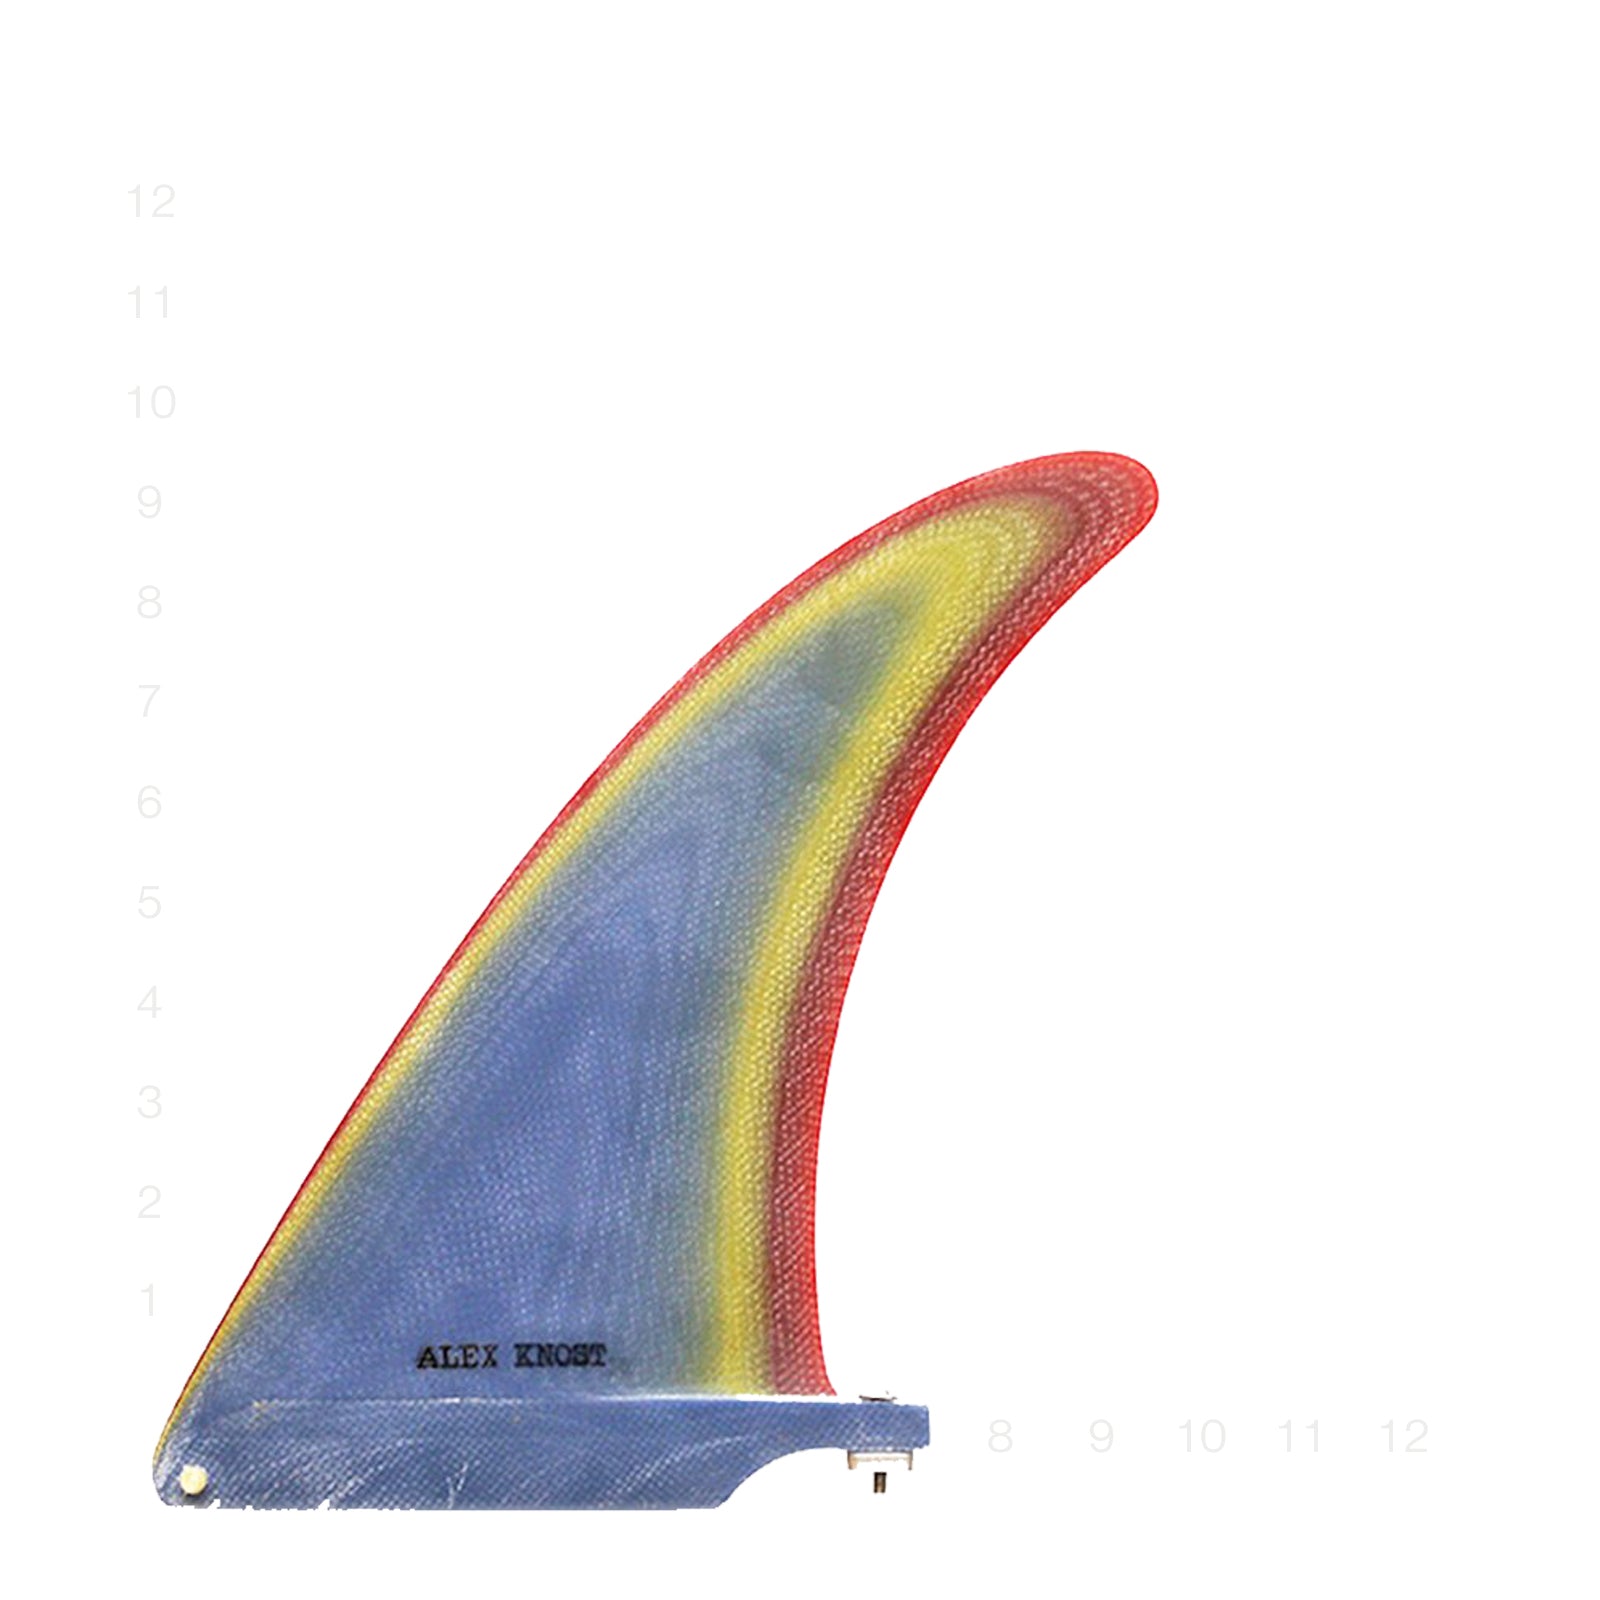 CAPTAIN FIN - ALEX KNOST CLASSIC 7.5 - Blue - Bing Surfboards